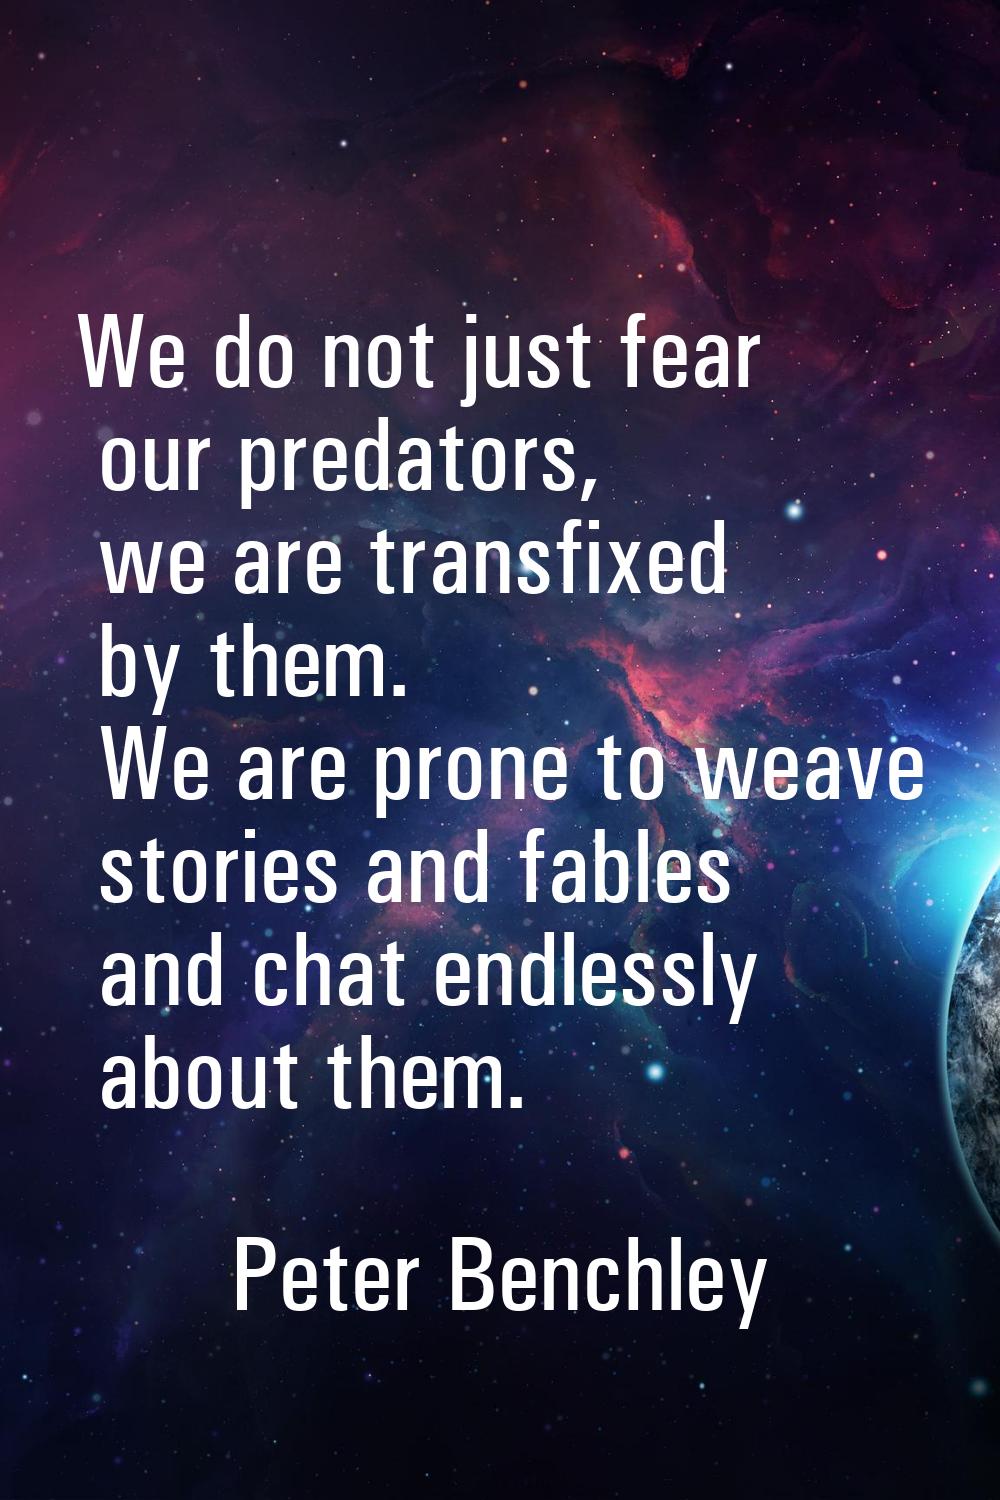 We do not just fear our predators, we are transfixed by them. We are prone to weave stories and fab